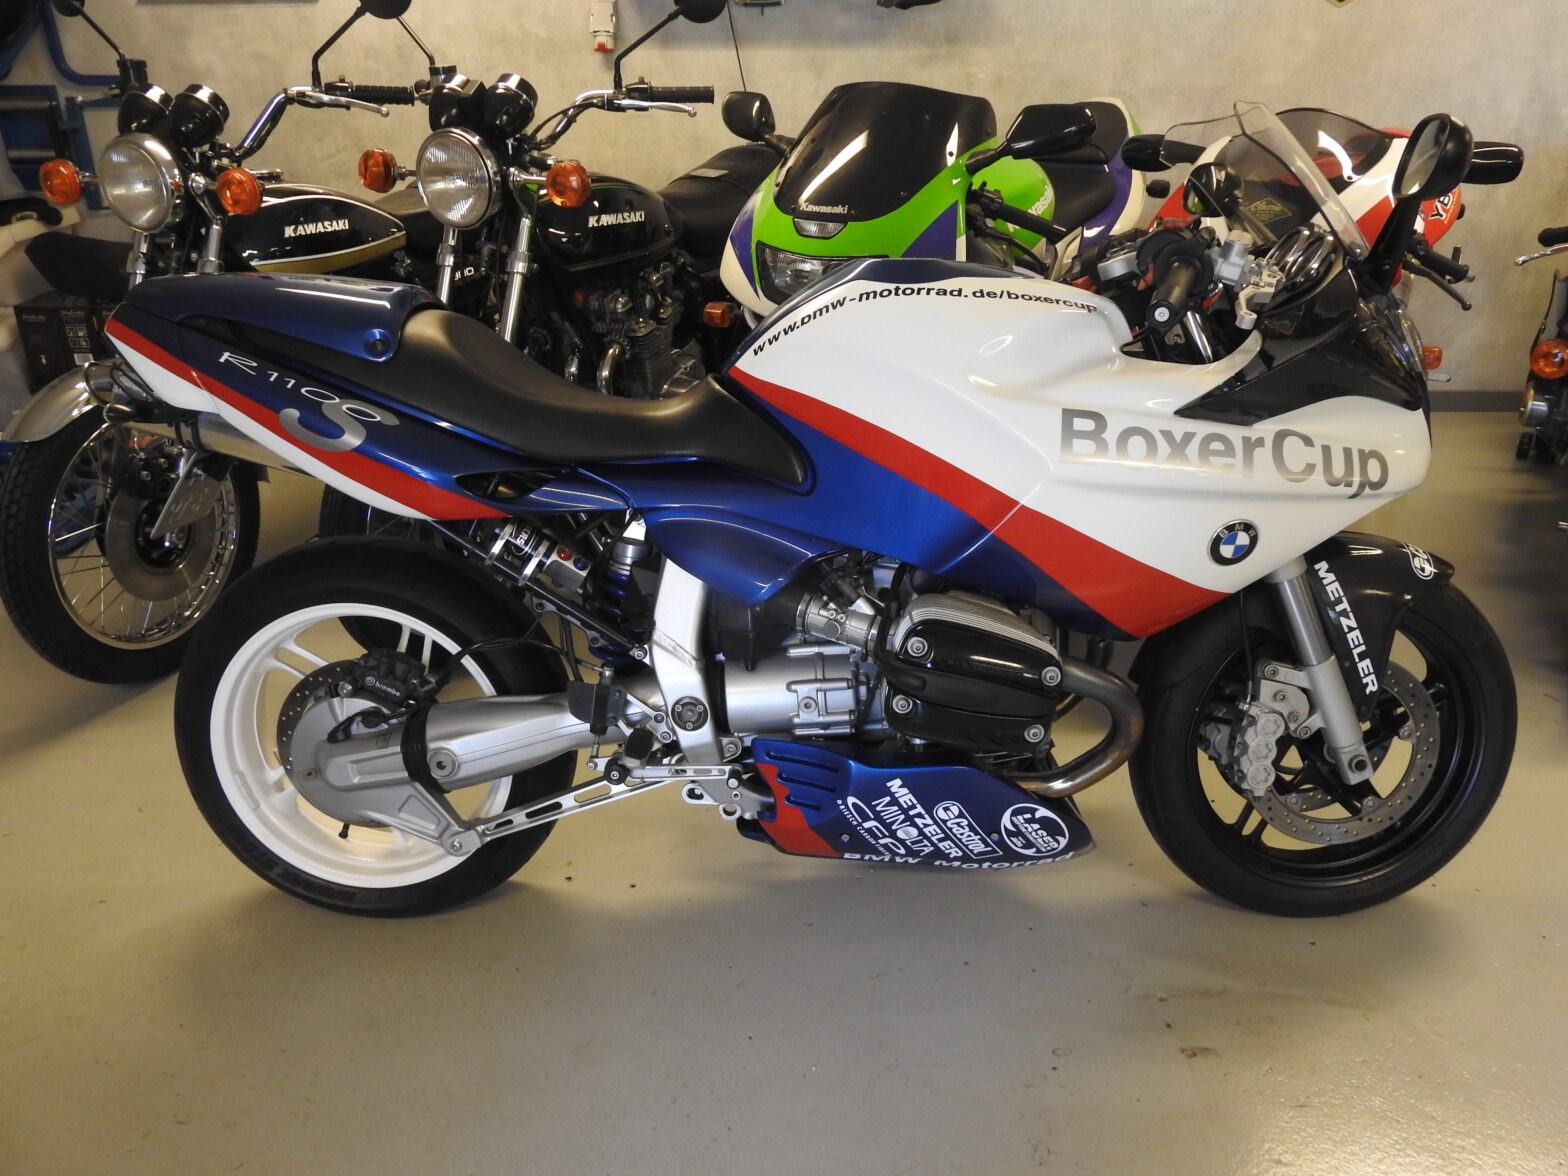 BMW R 1100 S Boxer Cup  2001